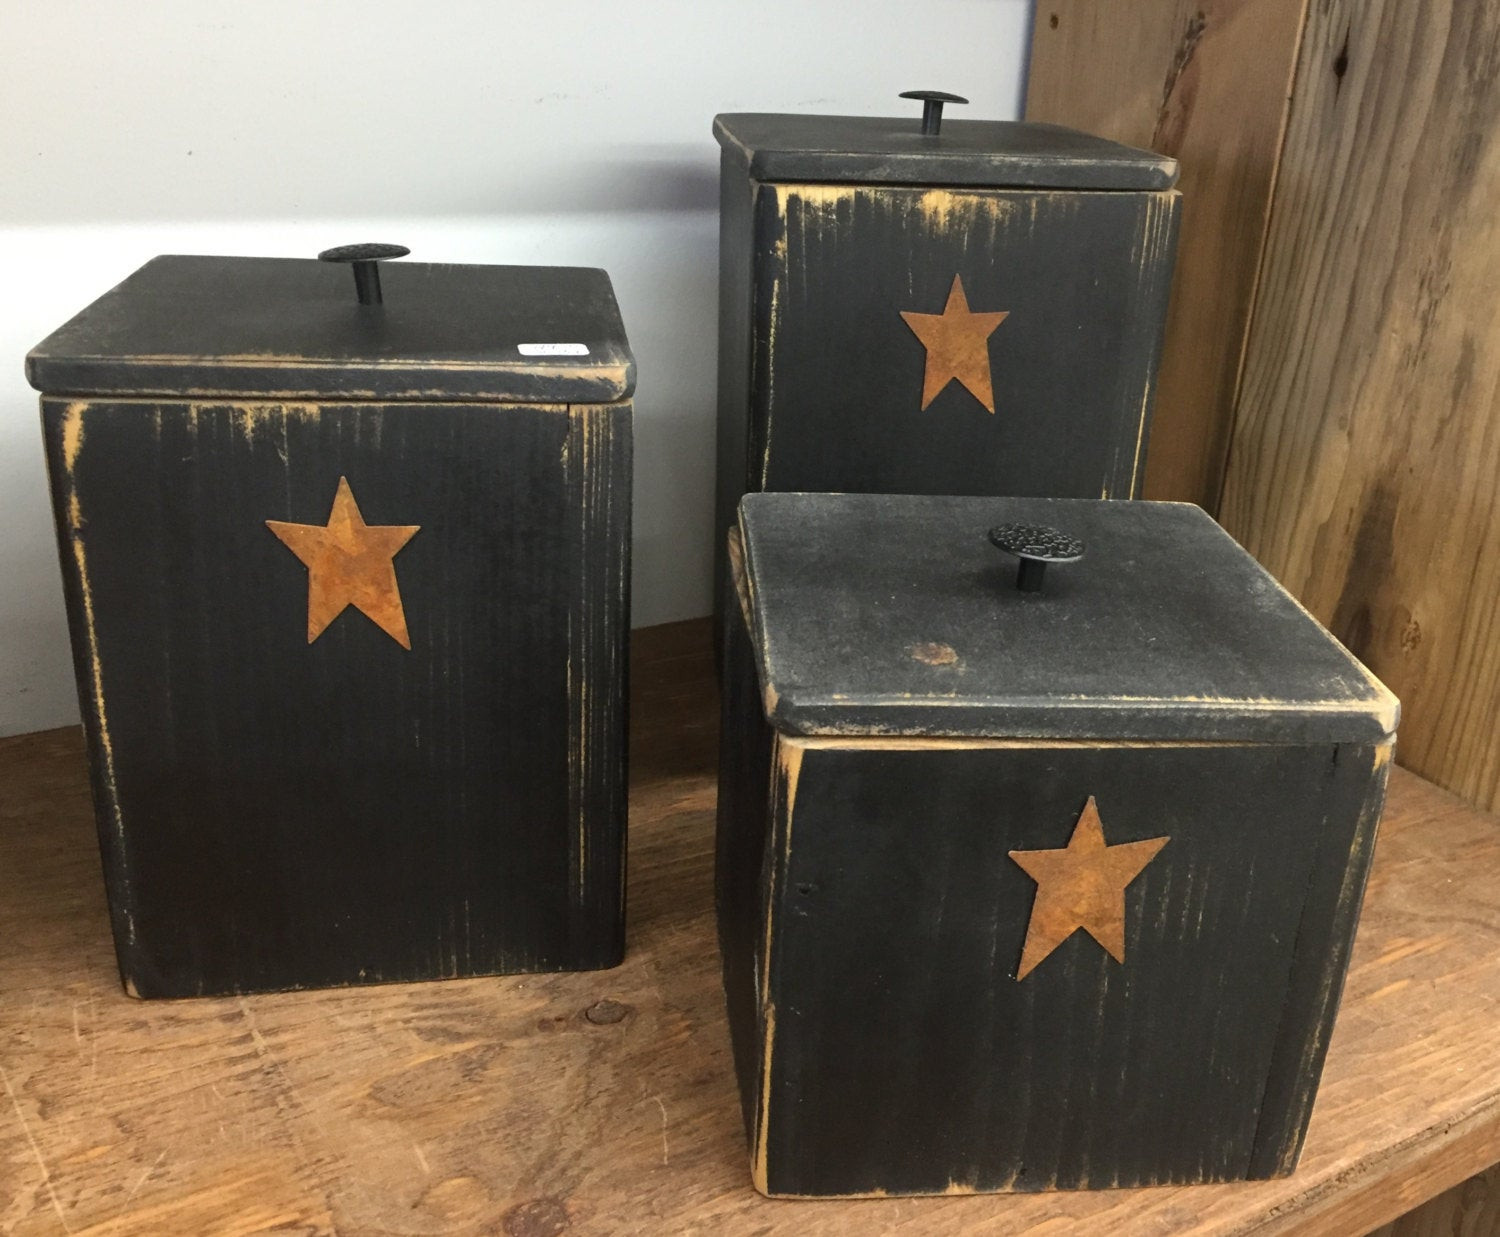 Rustic Kitchen Canisters
 Rustic Canister Set of Three Kitchen Decor & Storage